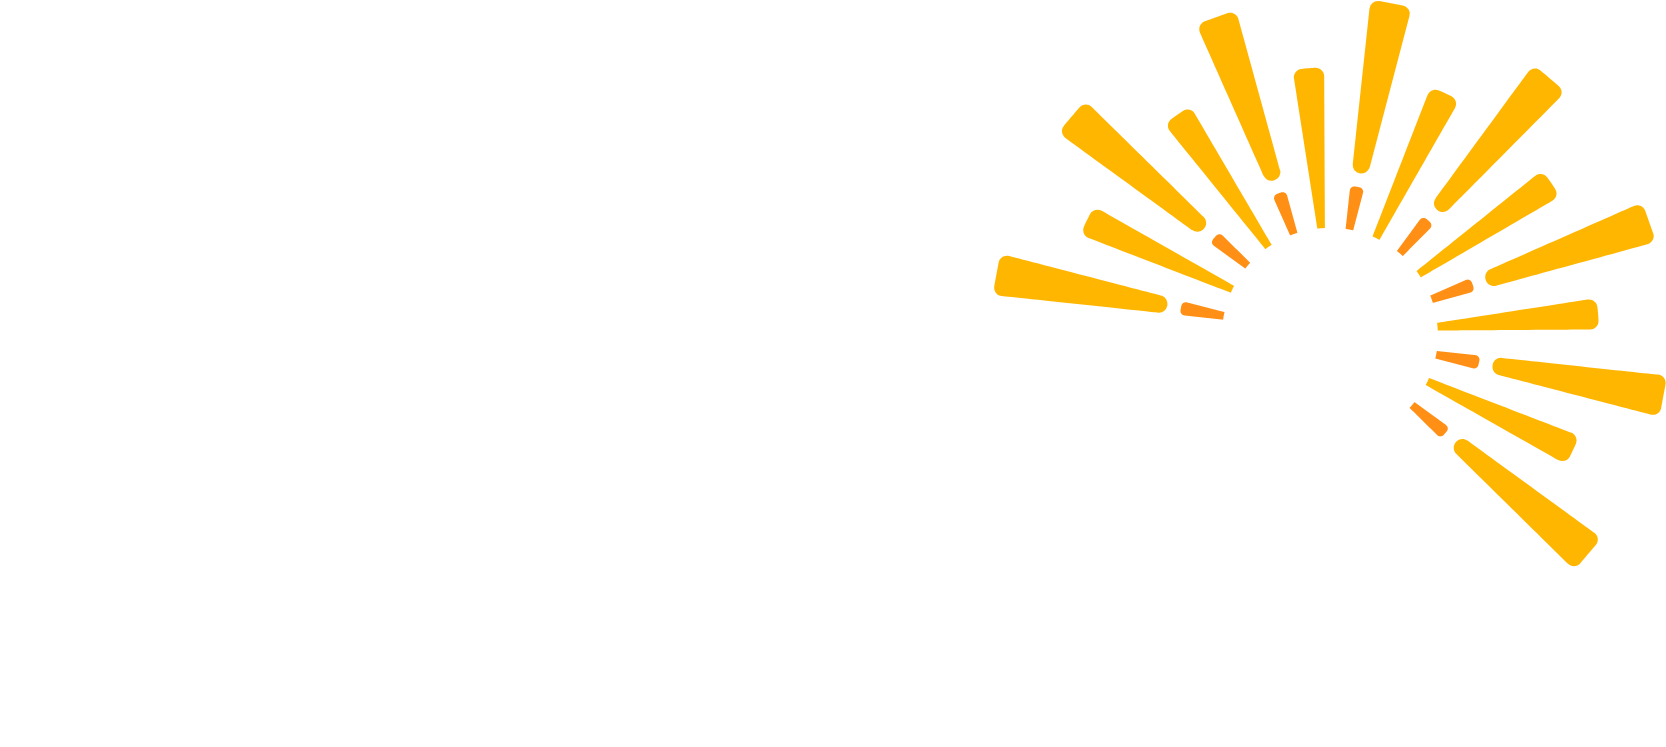 Day One Biopharmaceuticals logo large for dark backgrounds (transparent PNG)